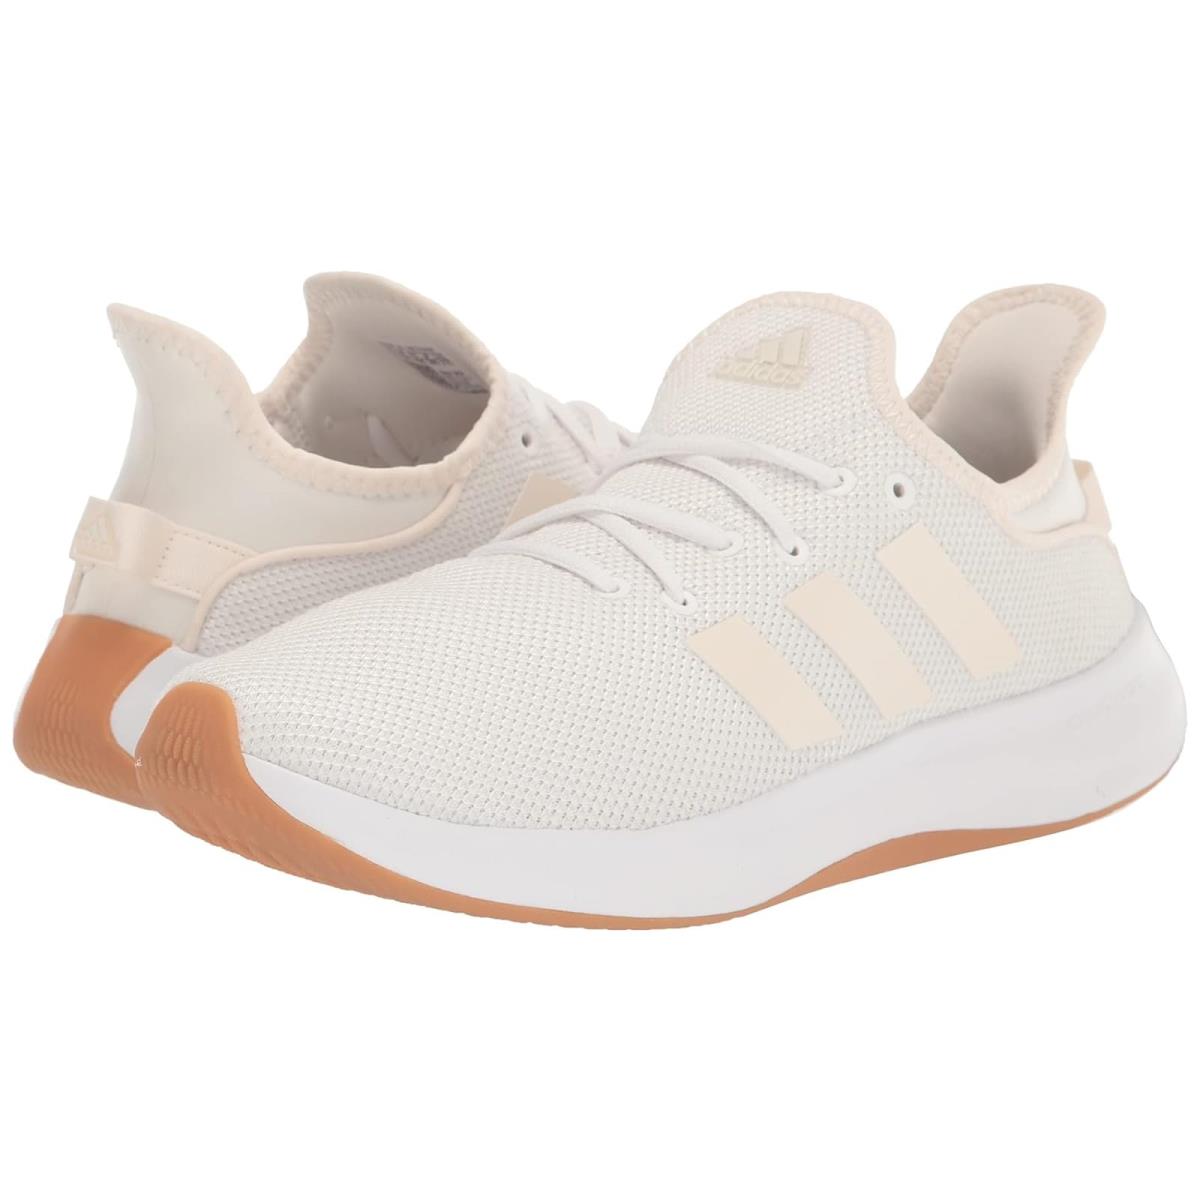 Woman`s Sneakers Athletic Shoes Adidas Running Cloudfoam Pure Spw Footwear White/Chalk White/Zero Metallic